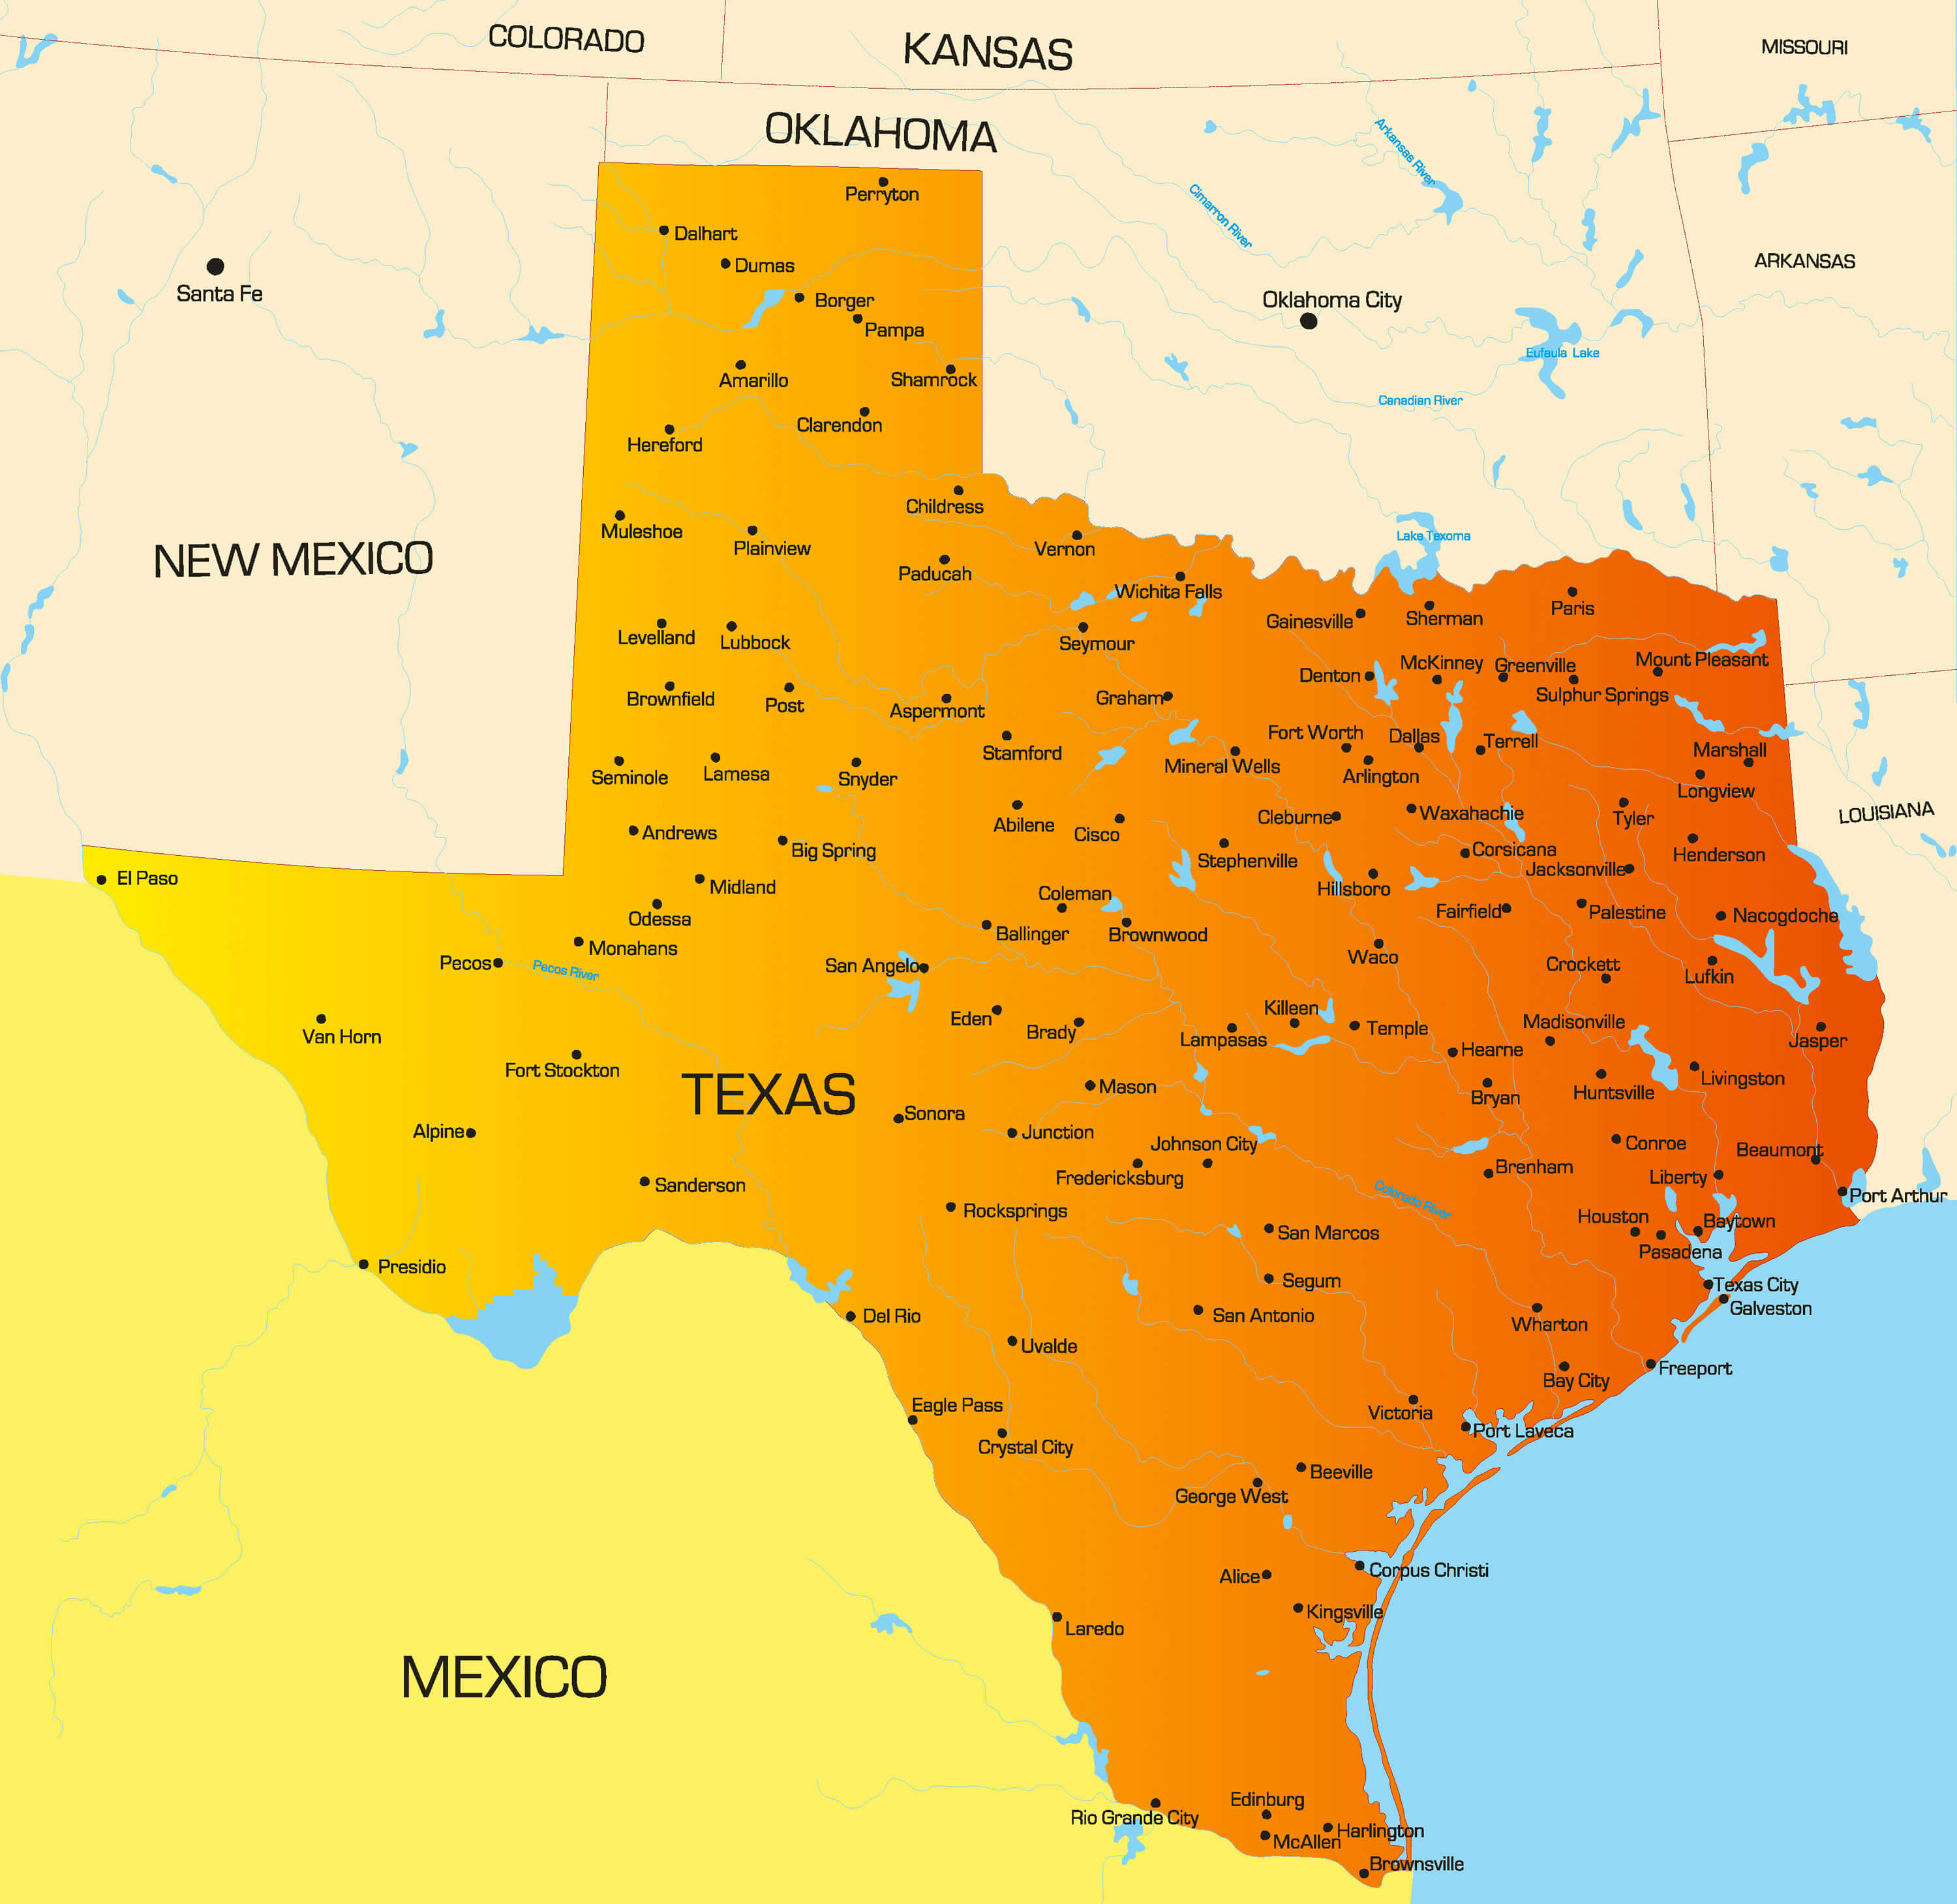 Texas Map - Guide Of The World - Where Is Amarillo On The Texas Map